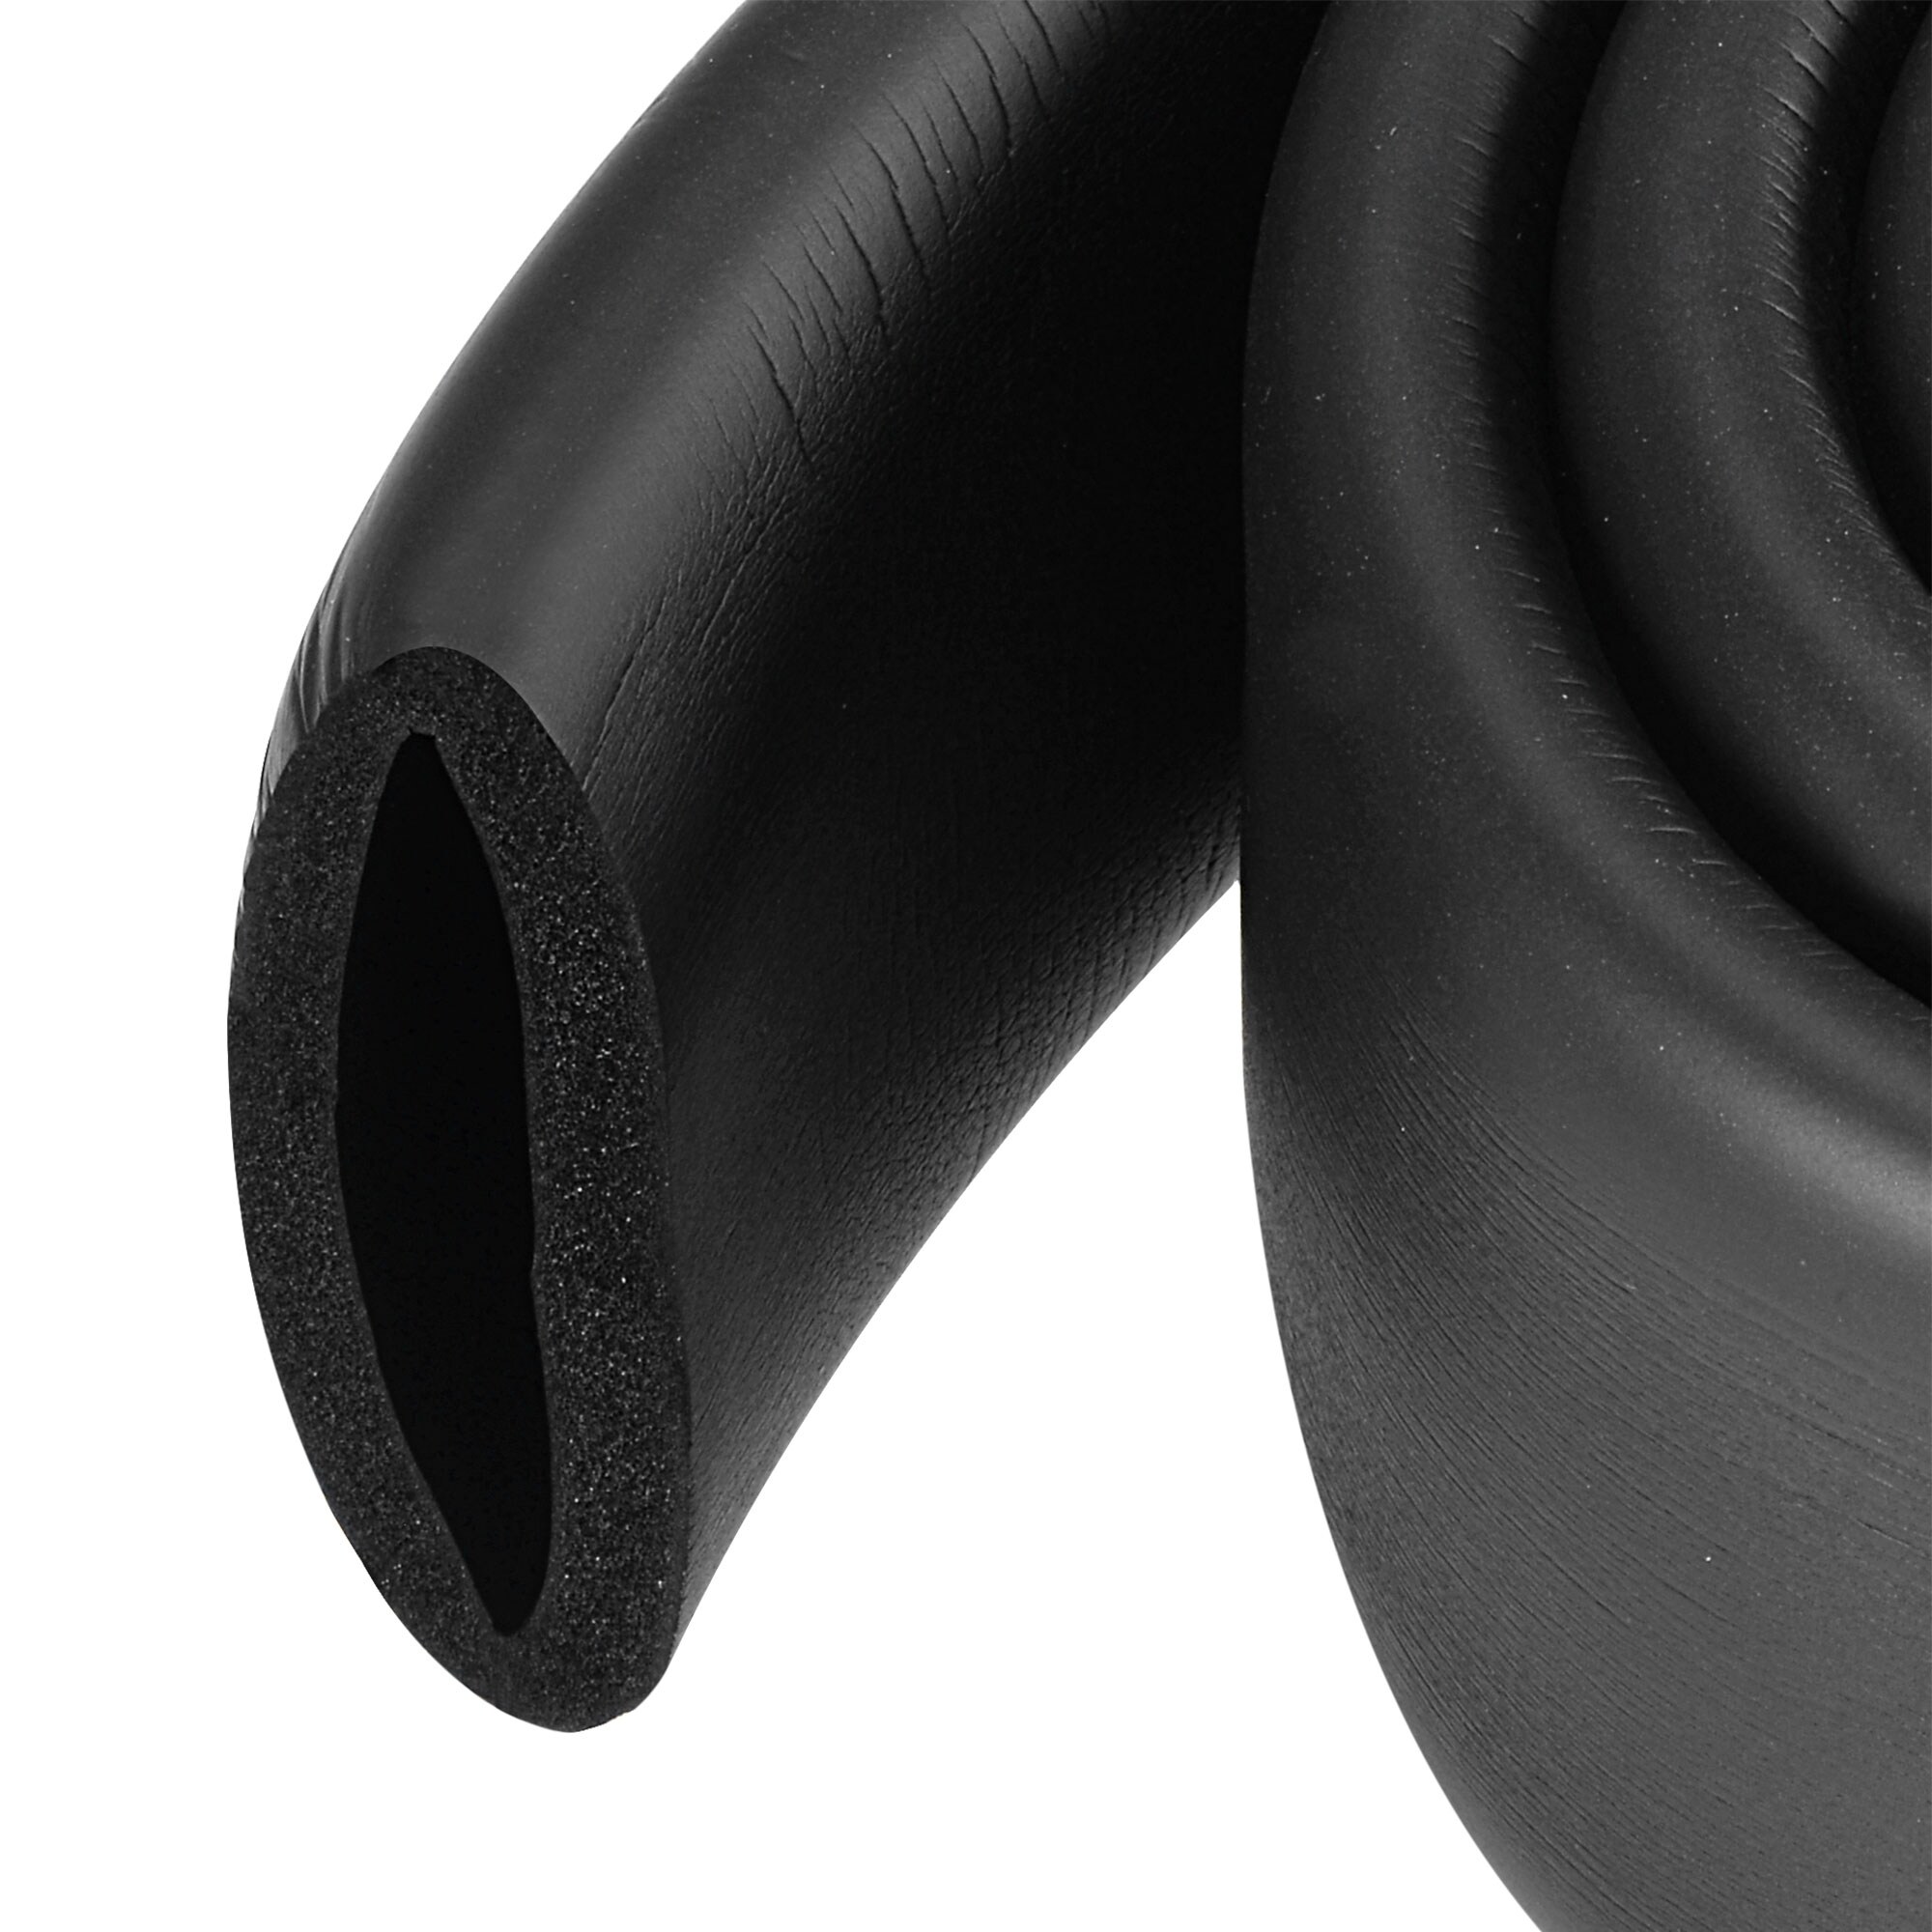 2 RUBBER VINYL HANDLE,GRIPS,BAR GRIPS FITS 3/4" TO 7/8 